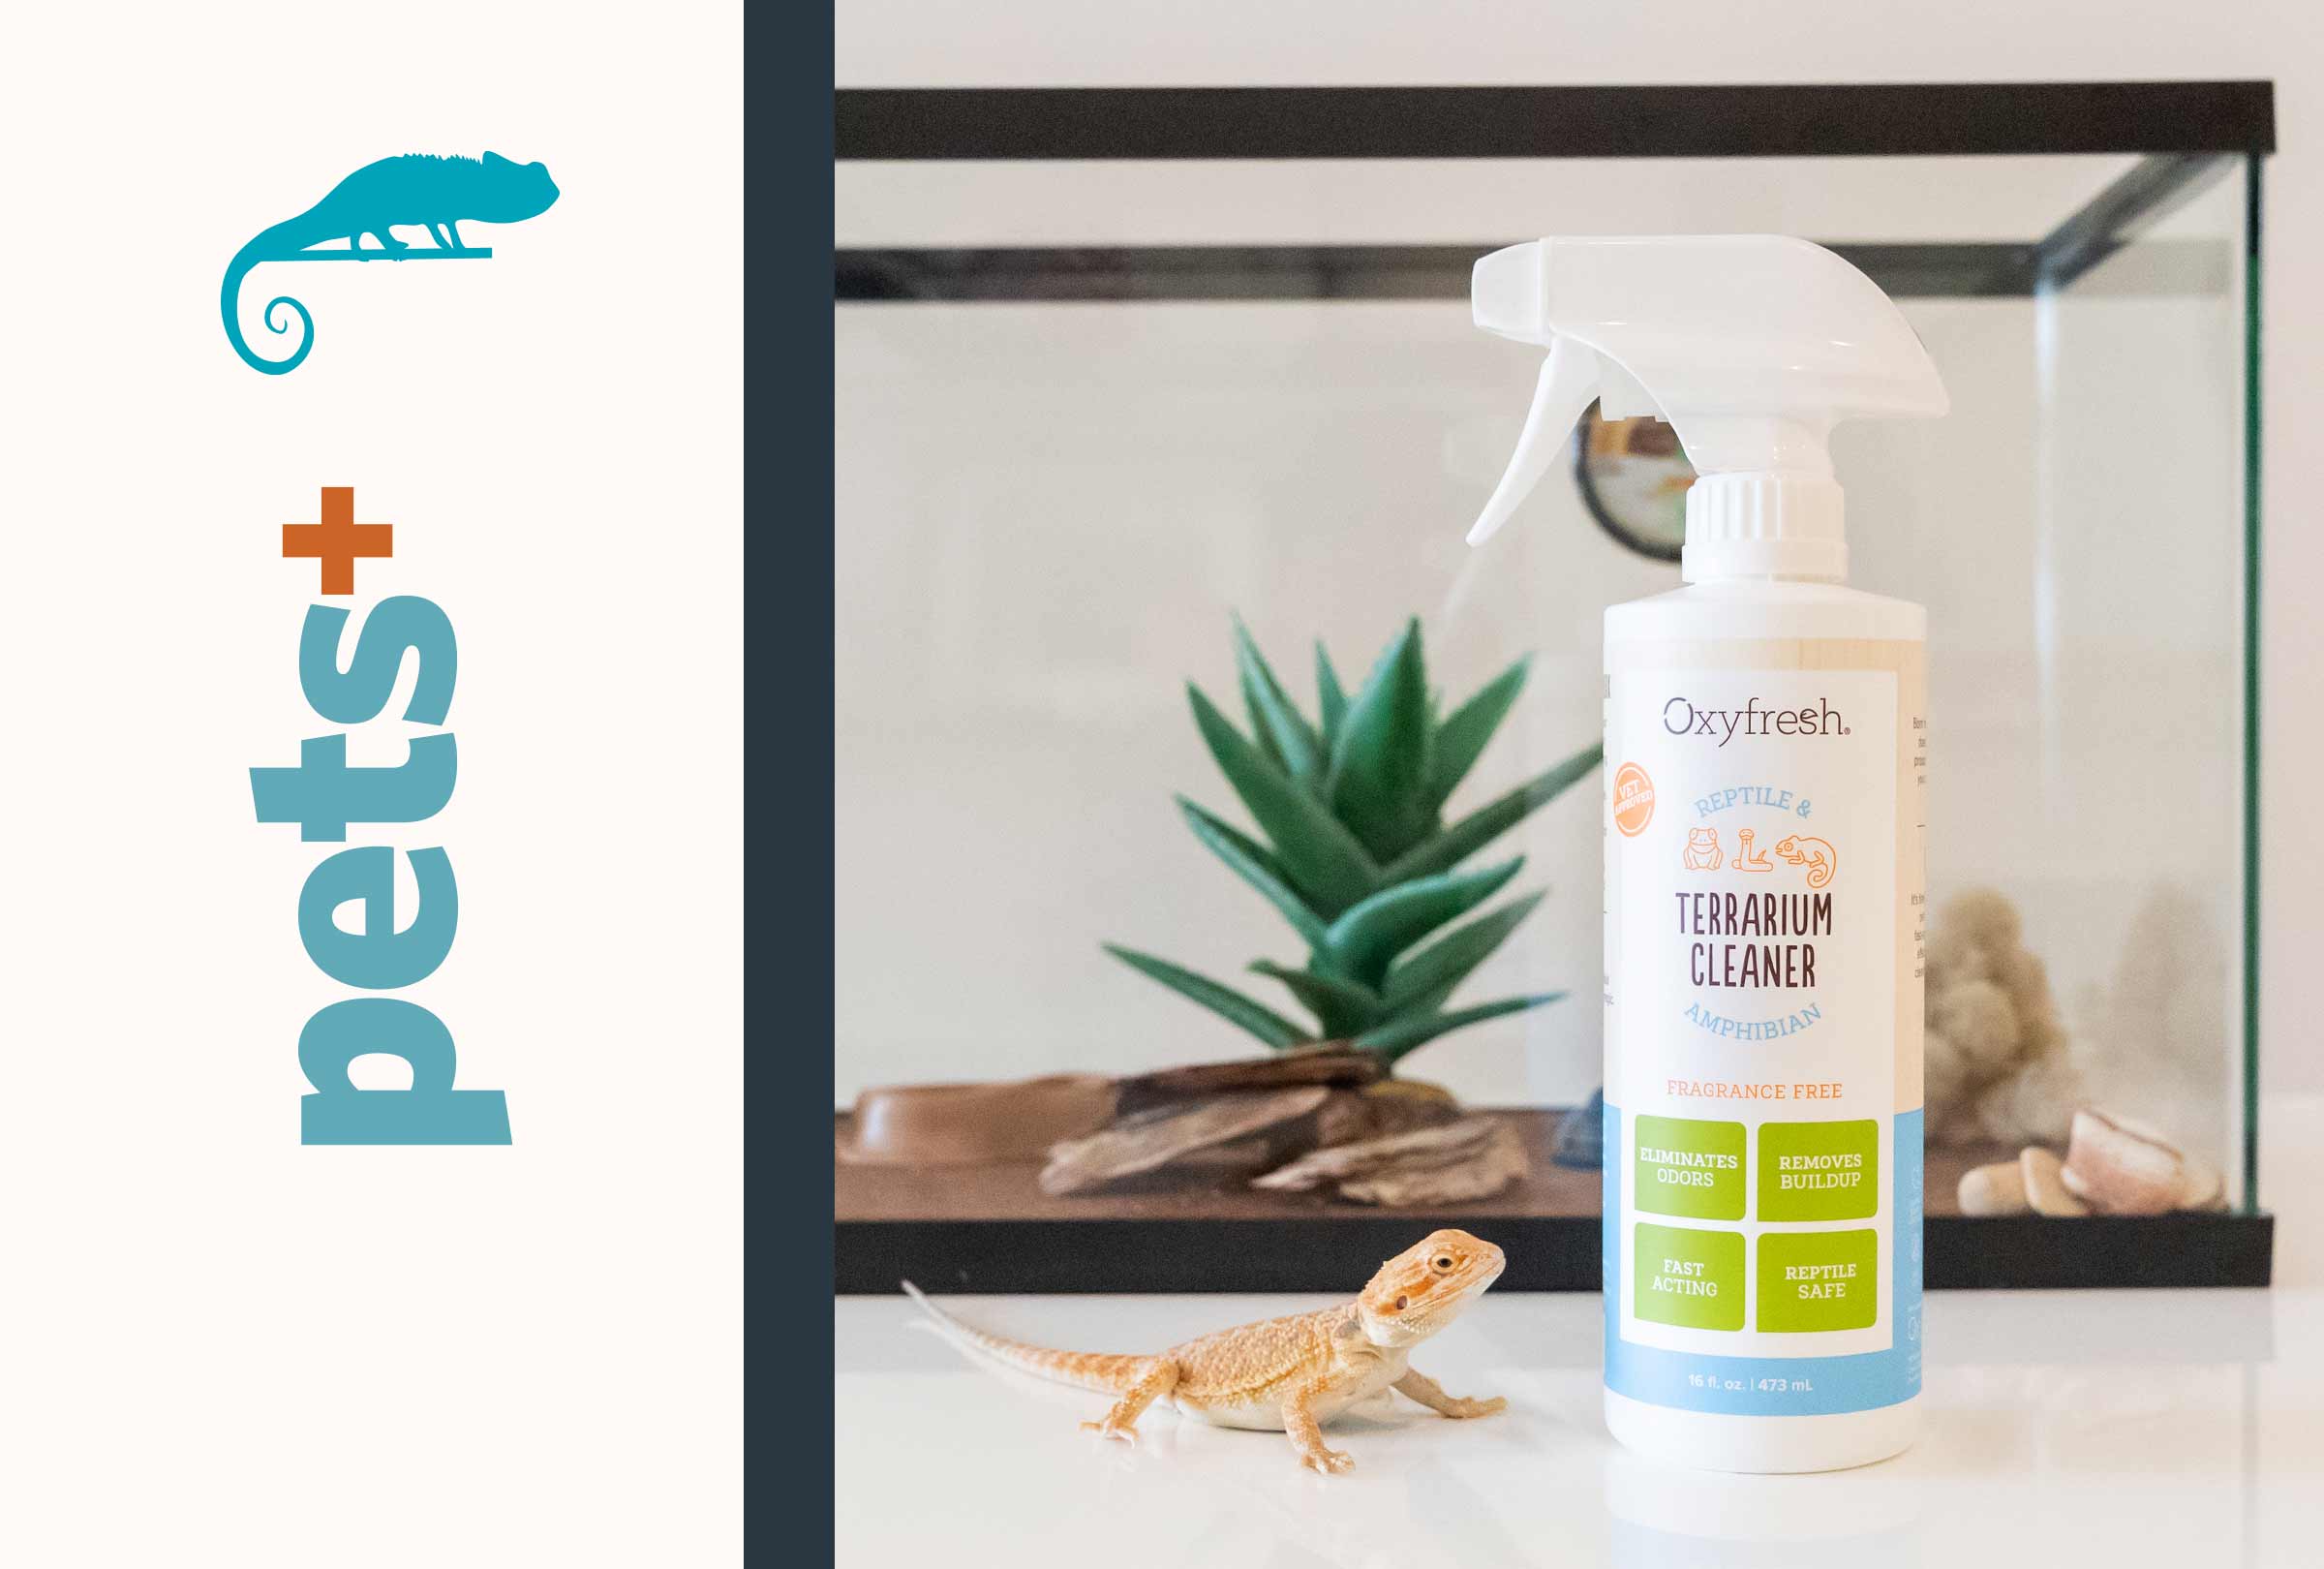 Oxyfresh-Terrarium-Cleaner-Feature-in-Pets+-Magazine-cleans-tough-stuck-on-pet-messes-from-reptiles